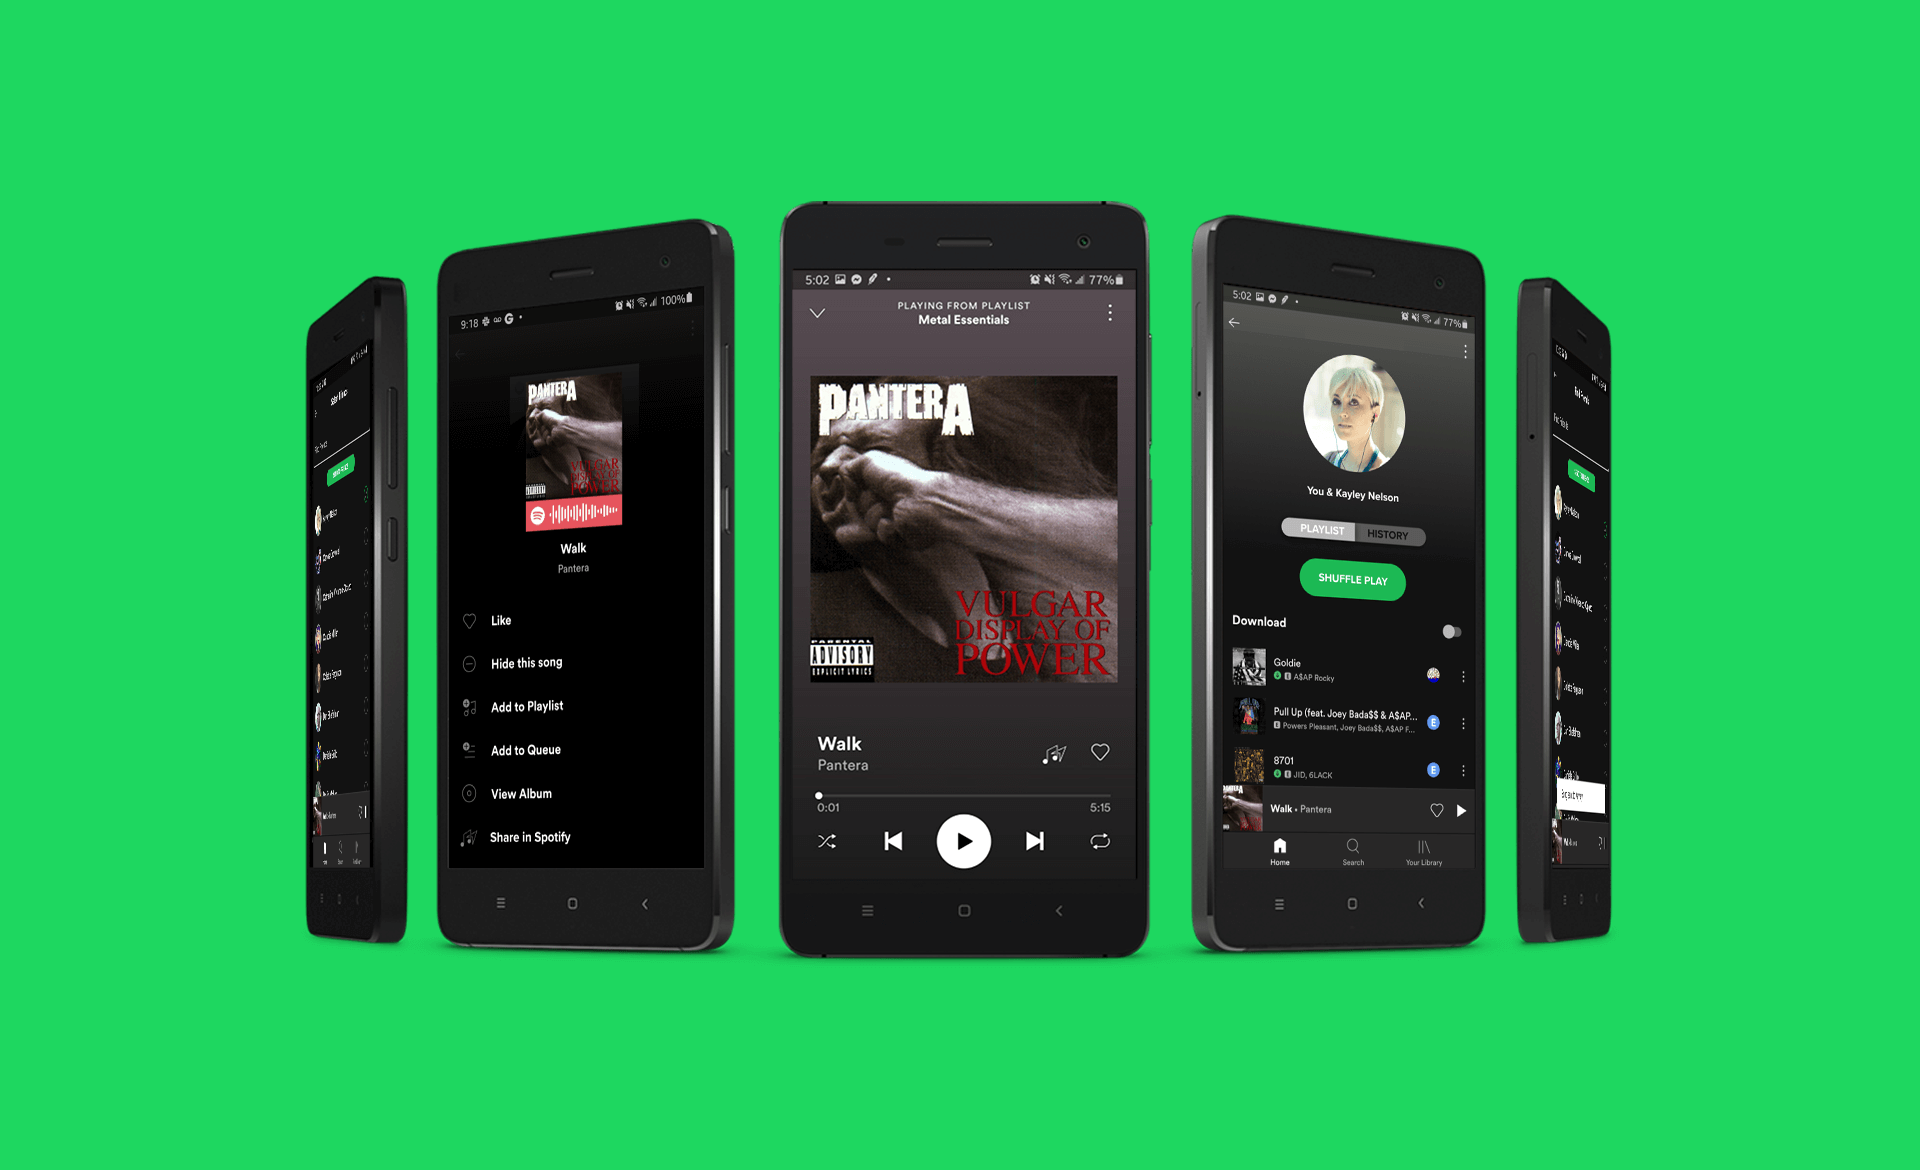 SHARE-In-SPOTIFY-1